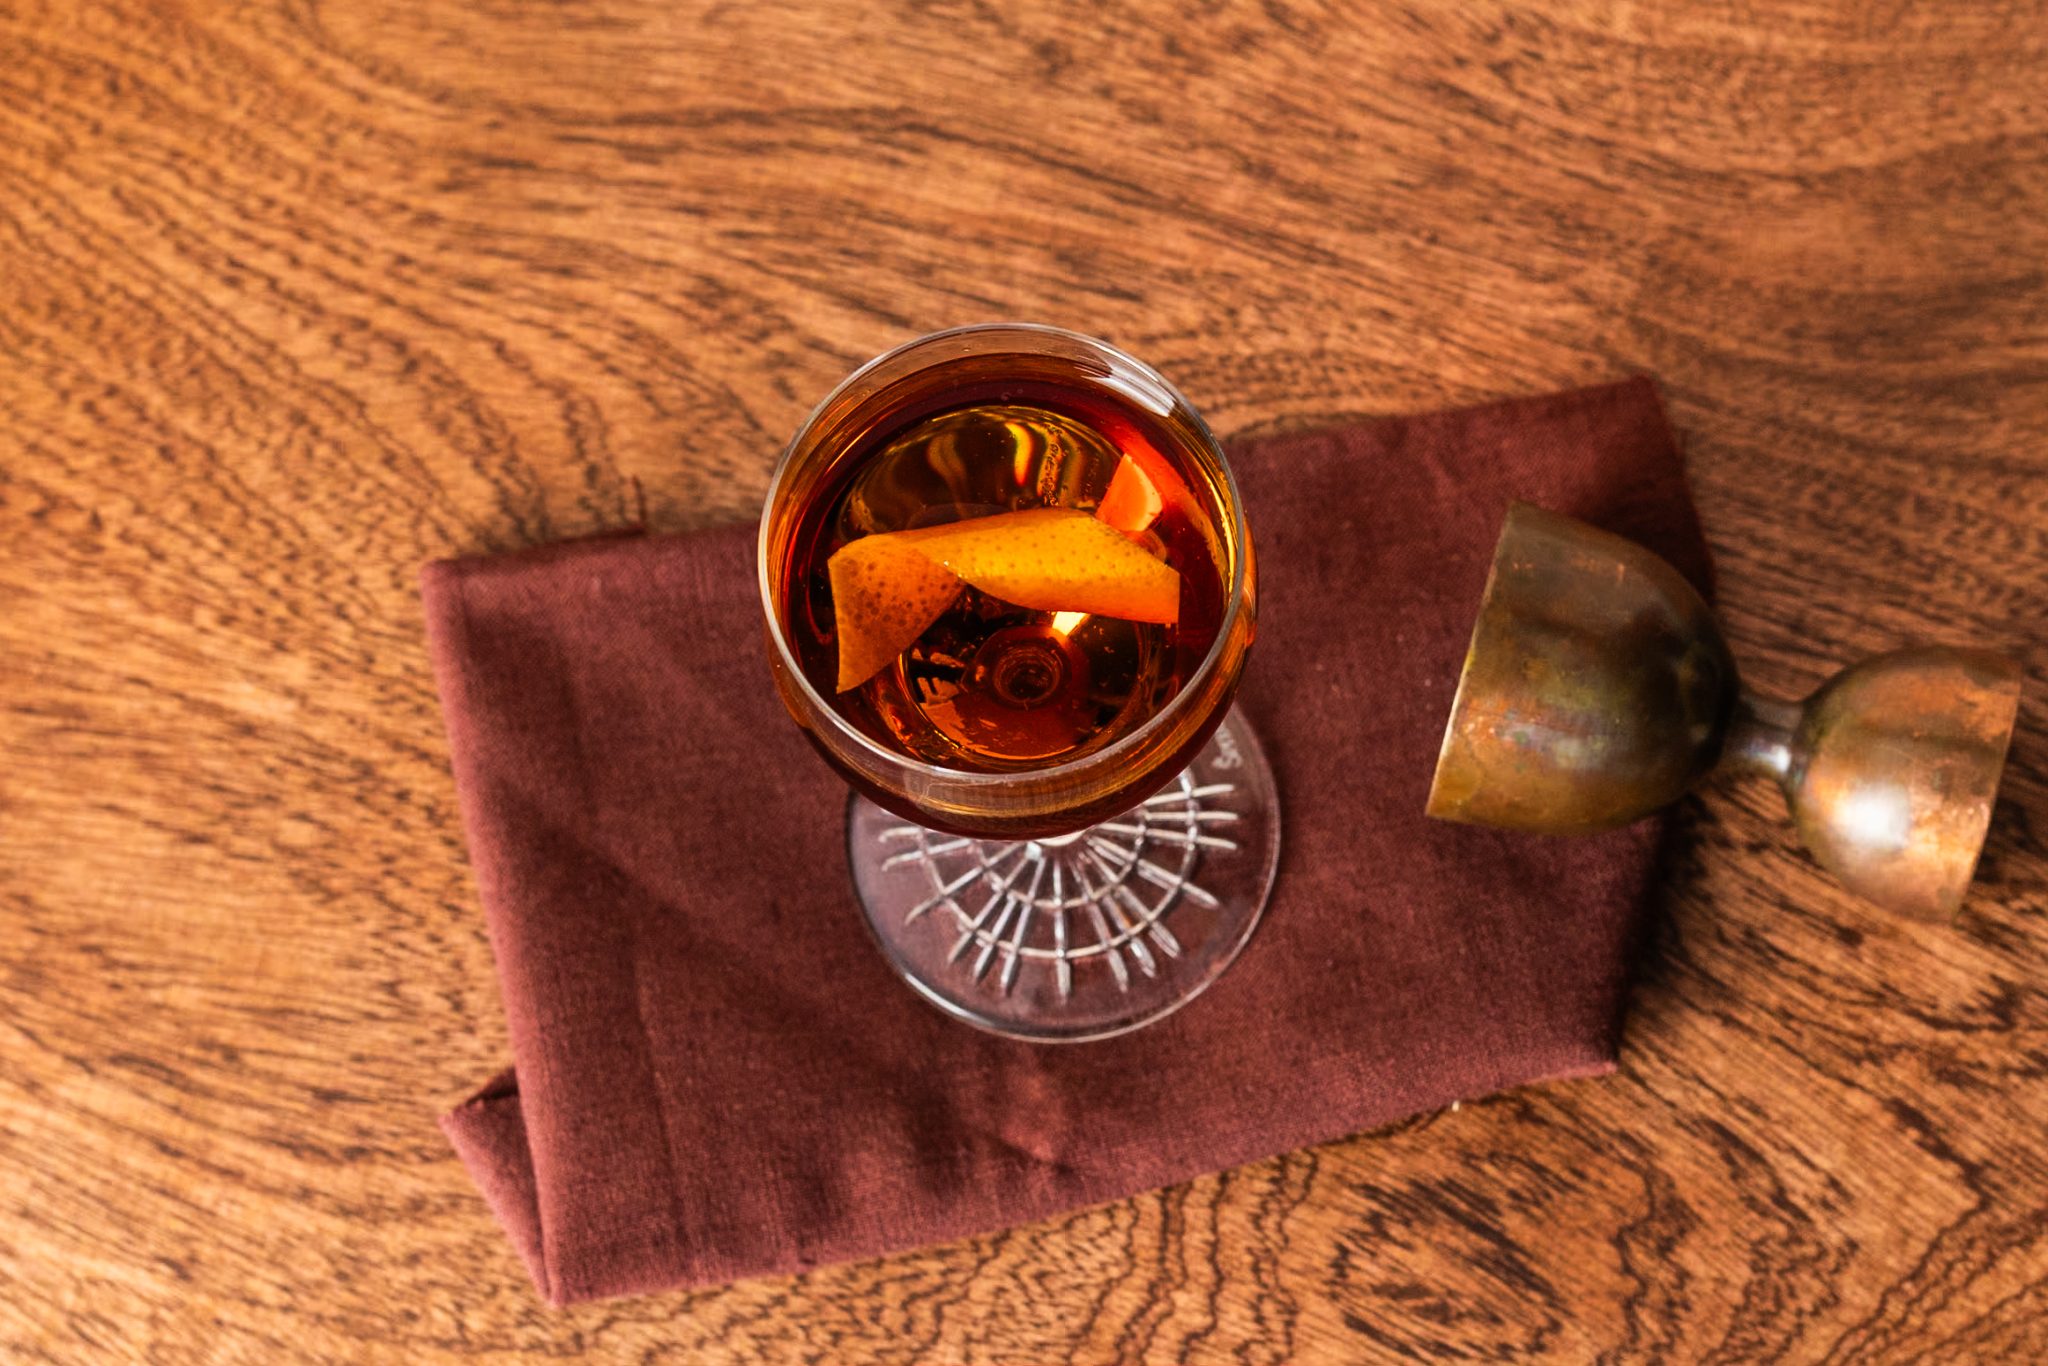 A Hanky Panky cocktail, shot from above, in a coupe glass on a maroon cloth placed on a brown wooden table with a jigger around.